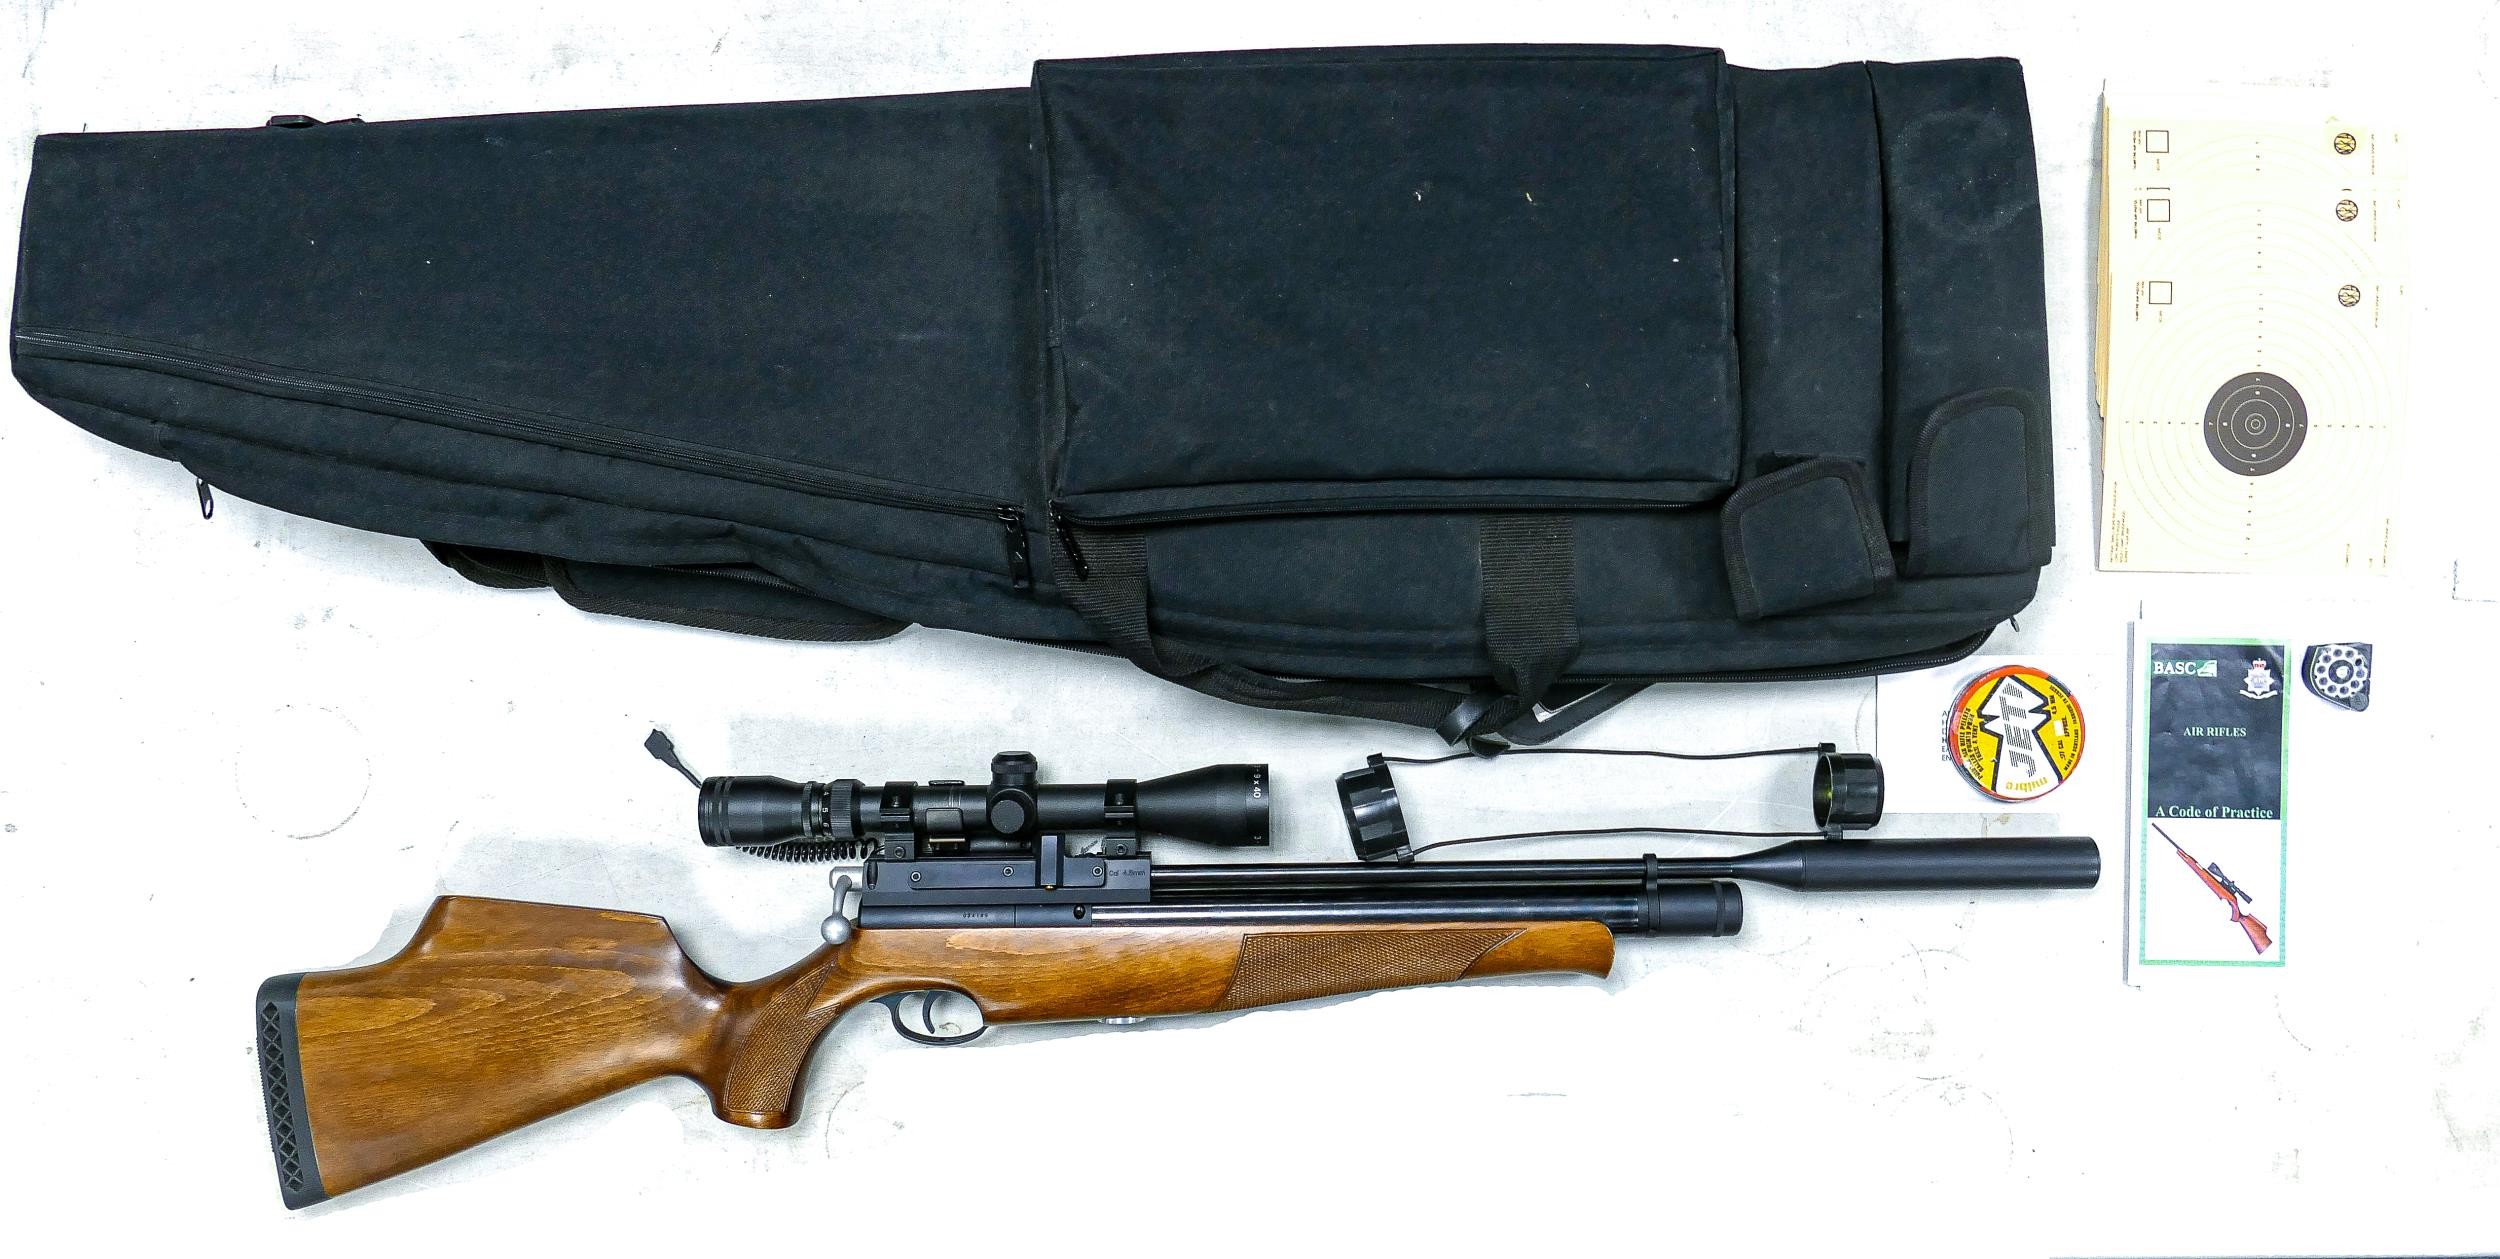 AIR ARMS S410 .177 Carbine English made Air Rifle, fitted Blazer 3-9x40 scope with holdall. - Image 2 of 8